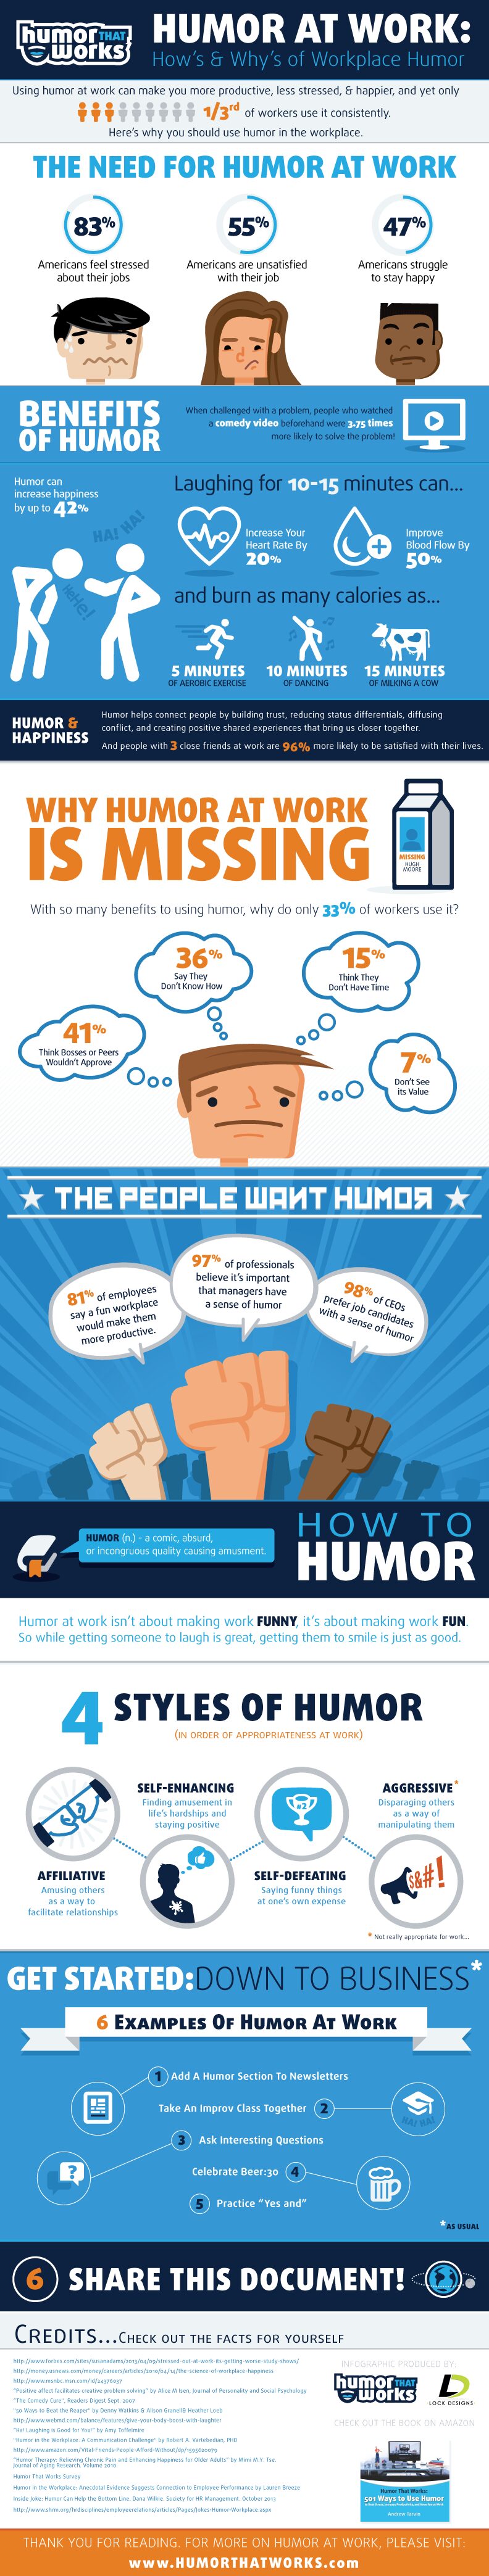 humor-at-work-infographic